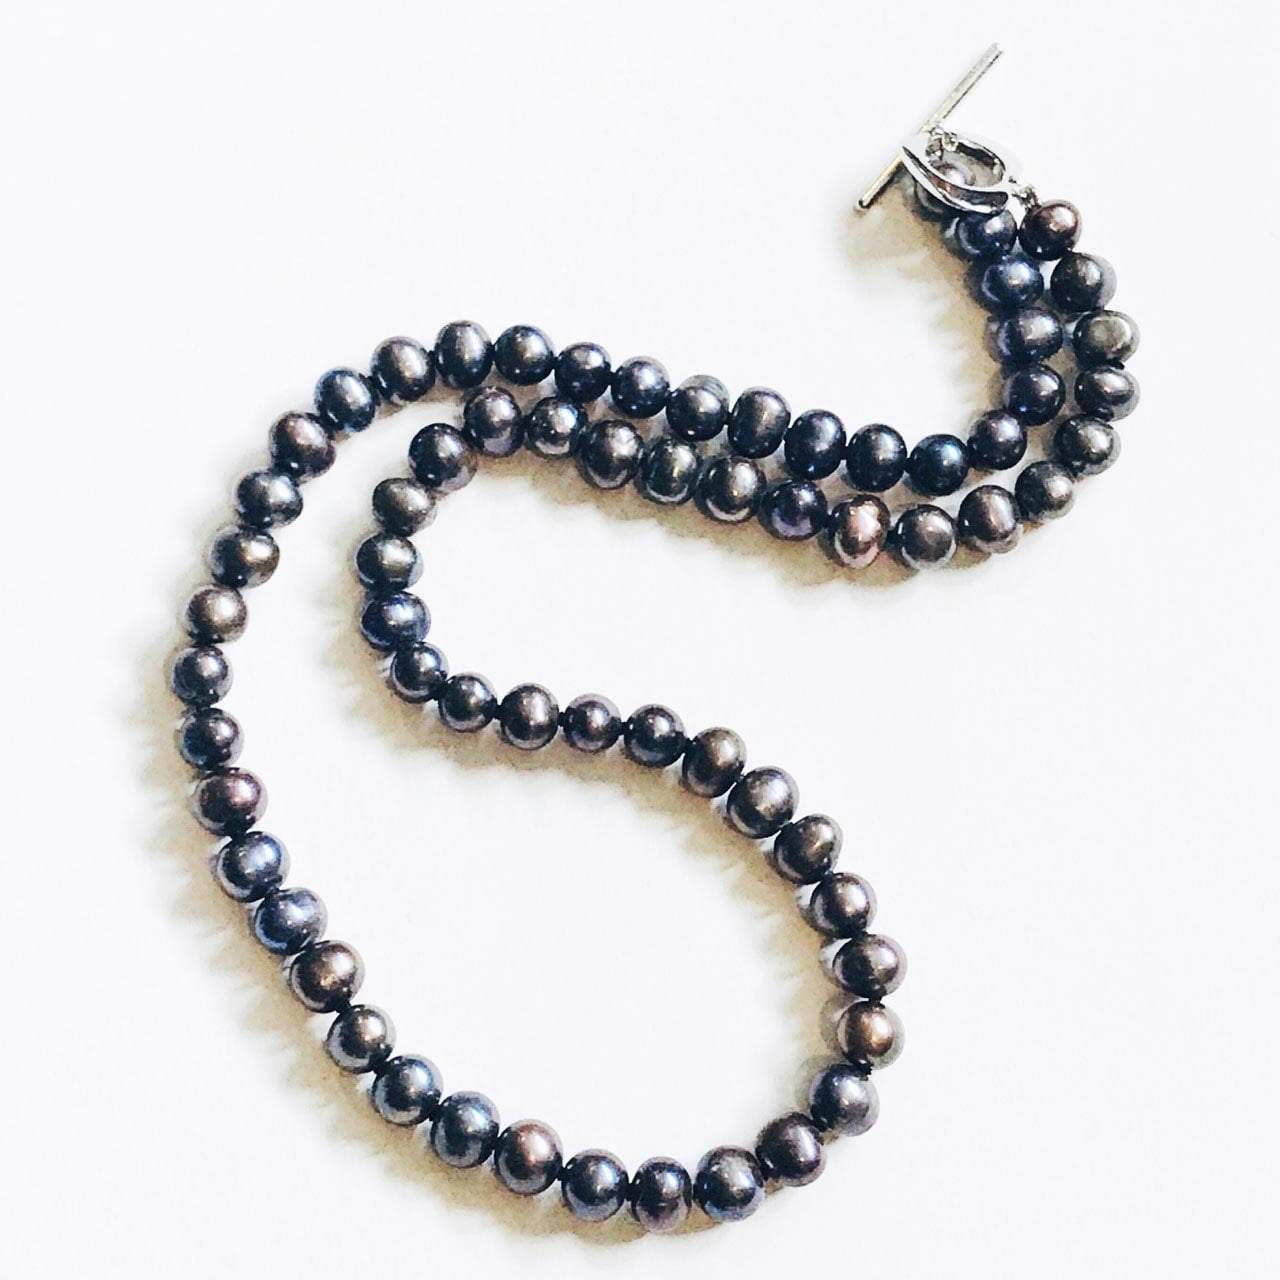 Yin Yang: Silver Necklace with Black spinel and pearls